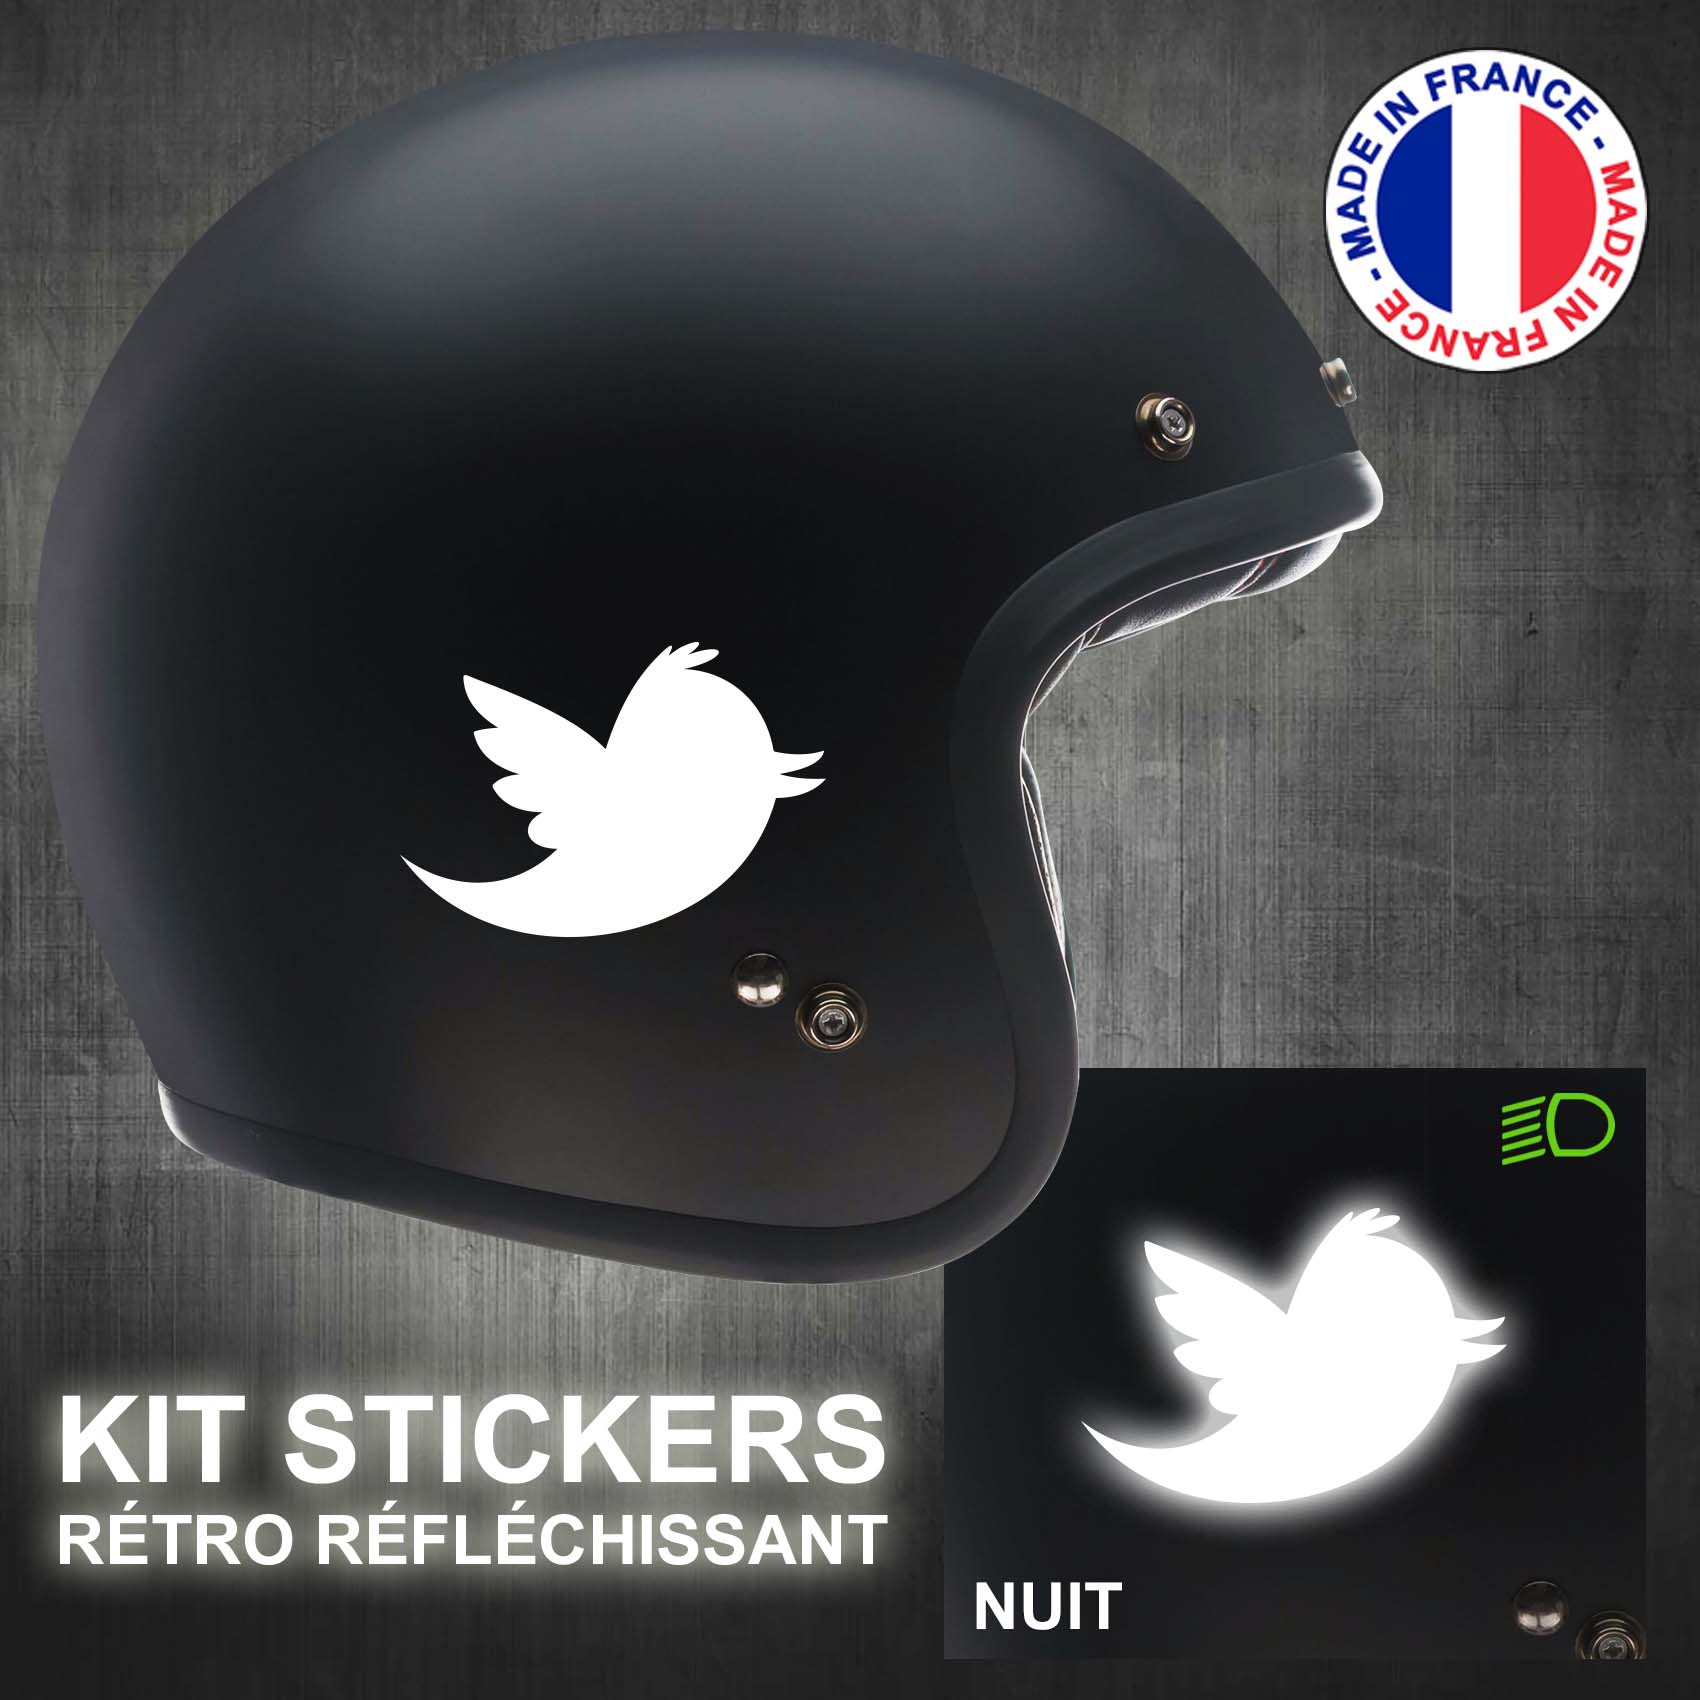 stickers-casque-moto-twitter-ref1-retro-reflechissant-autocollant-noir-moto-velo-tuning-racing-route-sticker-casques-adhesif-scooter-nuit-securite-decals-personnalise-personnalisable-min